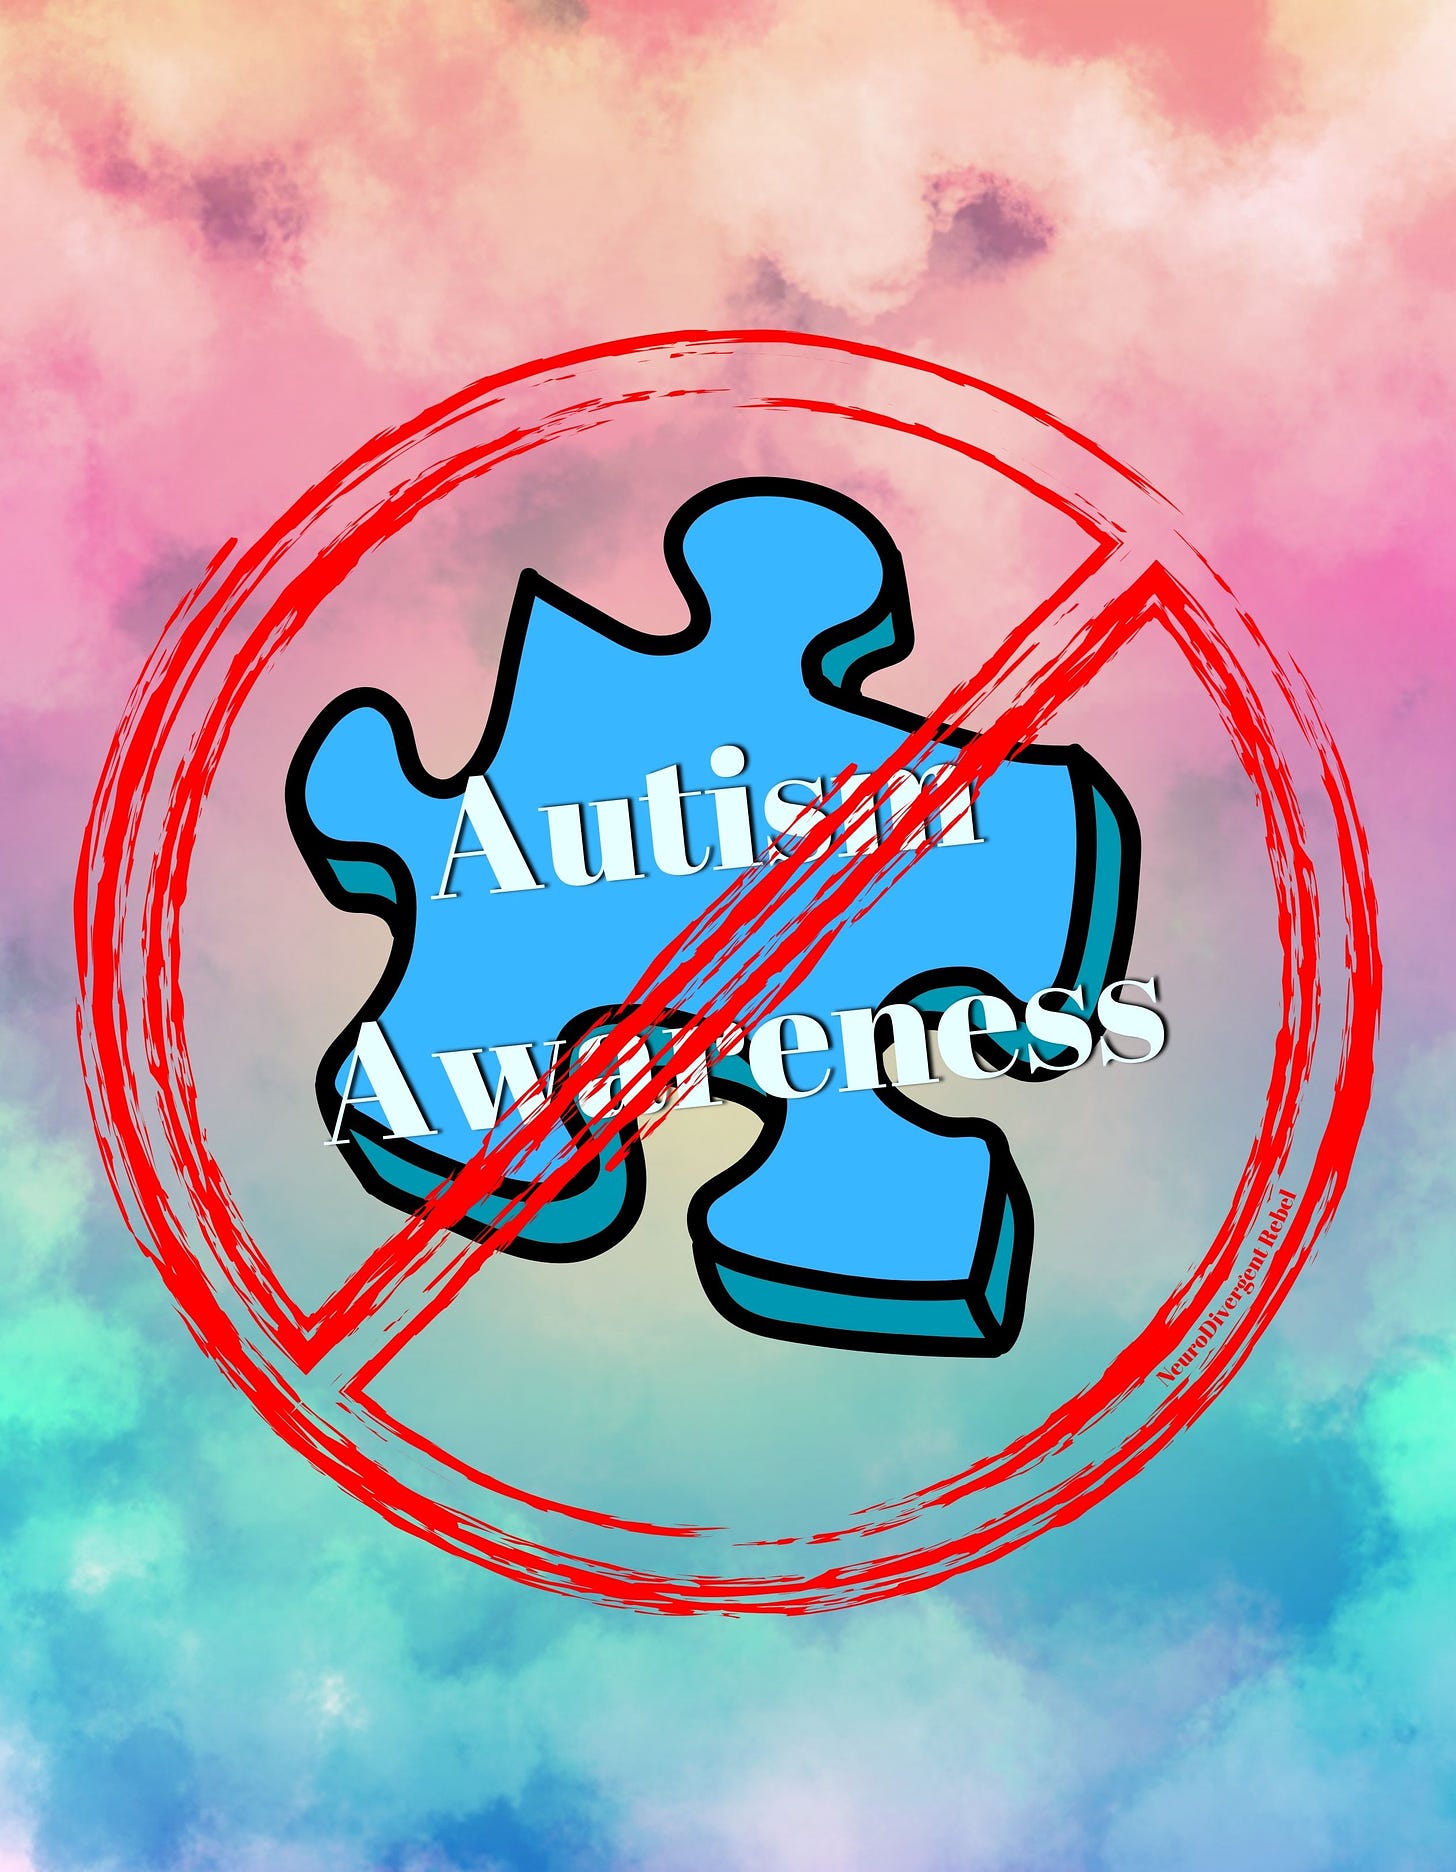 A blue puzzle piece appears on a rainbow background with the words Autism Awareness floating on it in off-white. In front of that is a red mark, crossed through, symbolizing NO Autism Awareness.